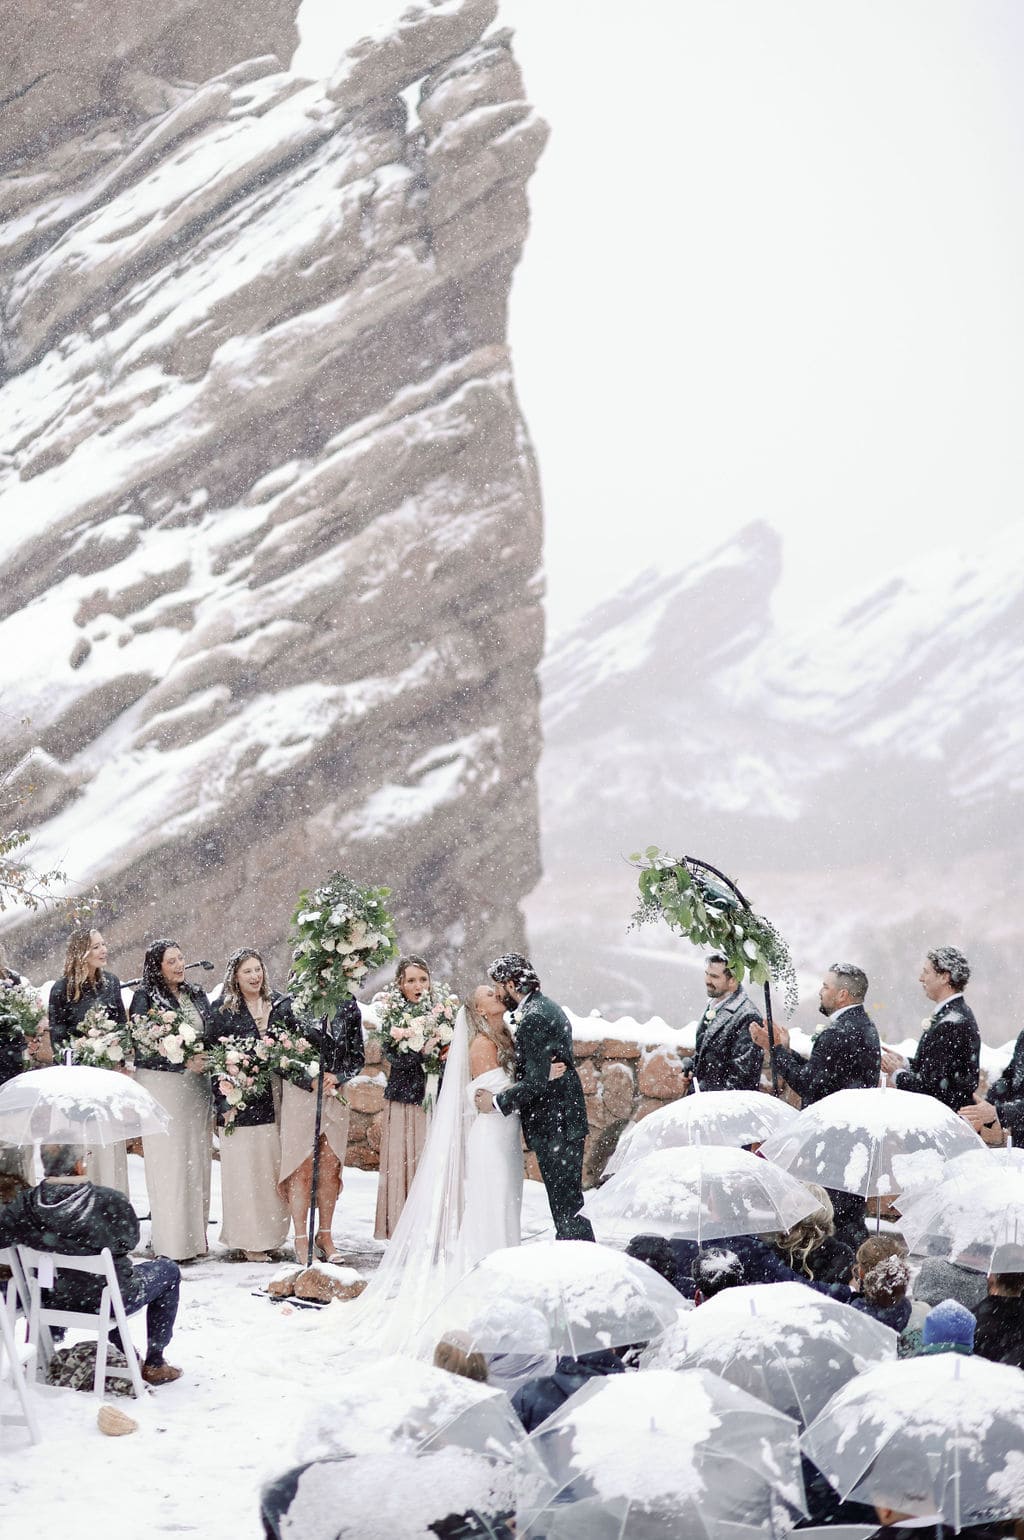 Gorgeous first kiss photo in the snow at red rocks wedding ceremony